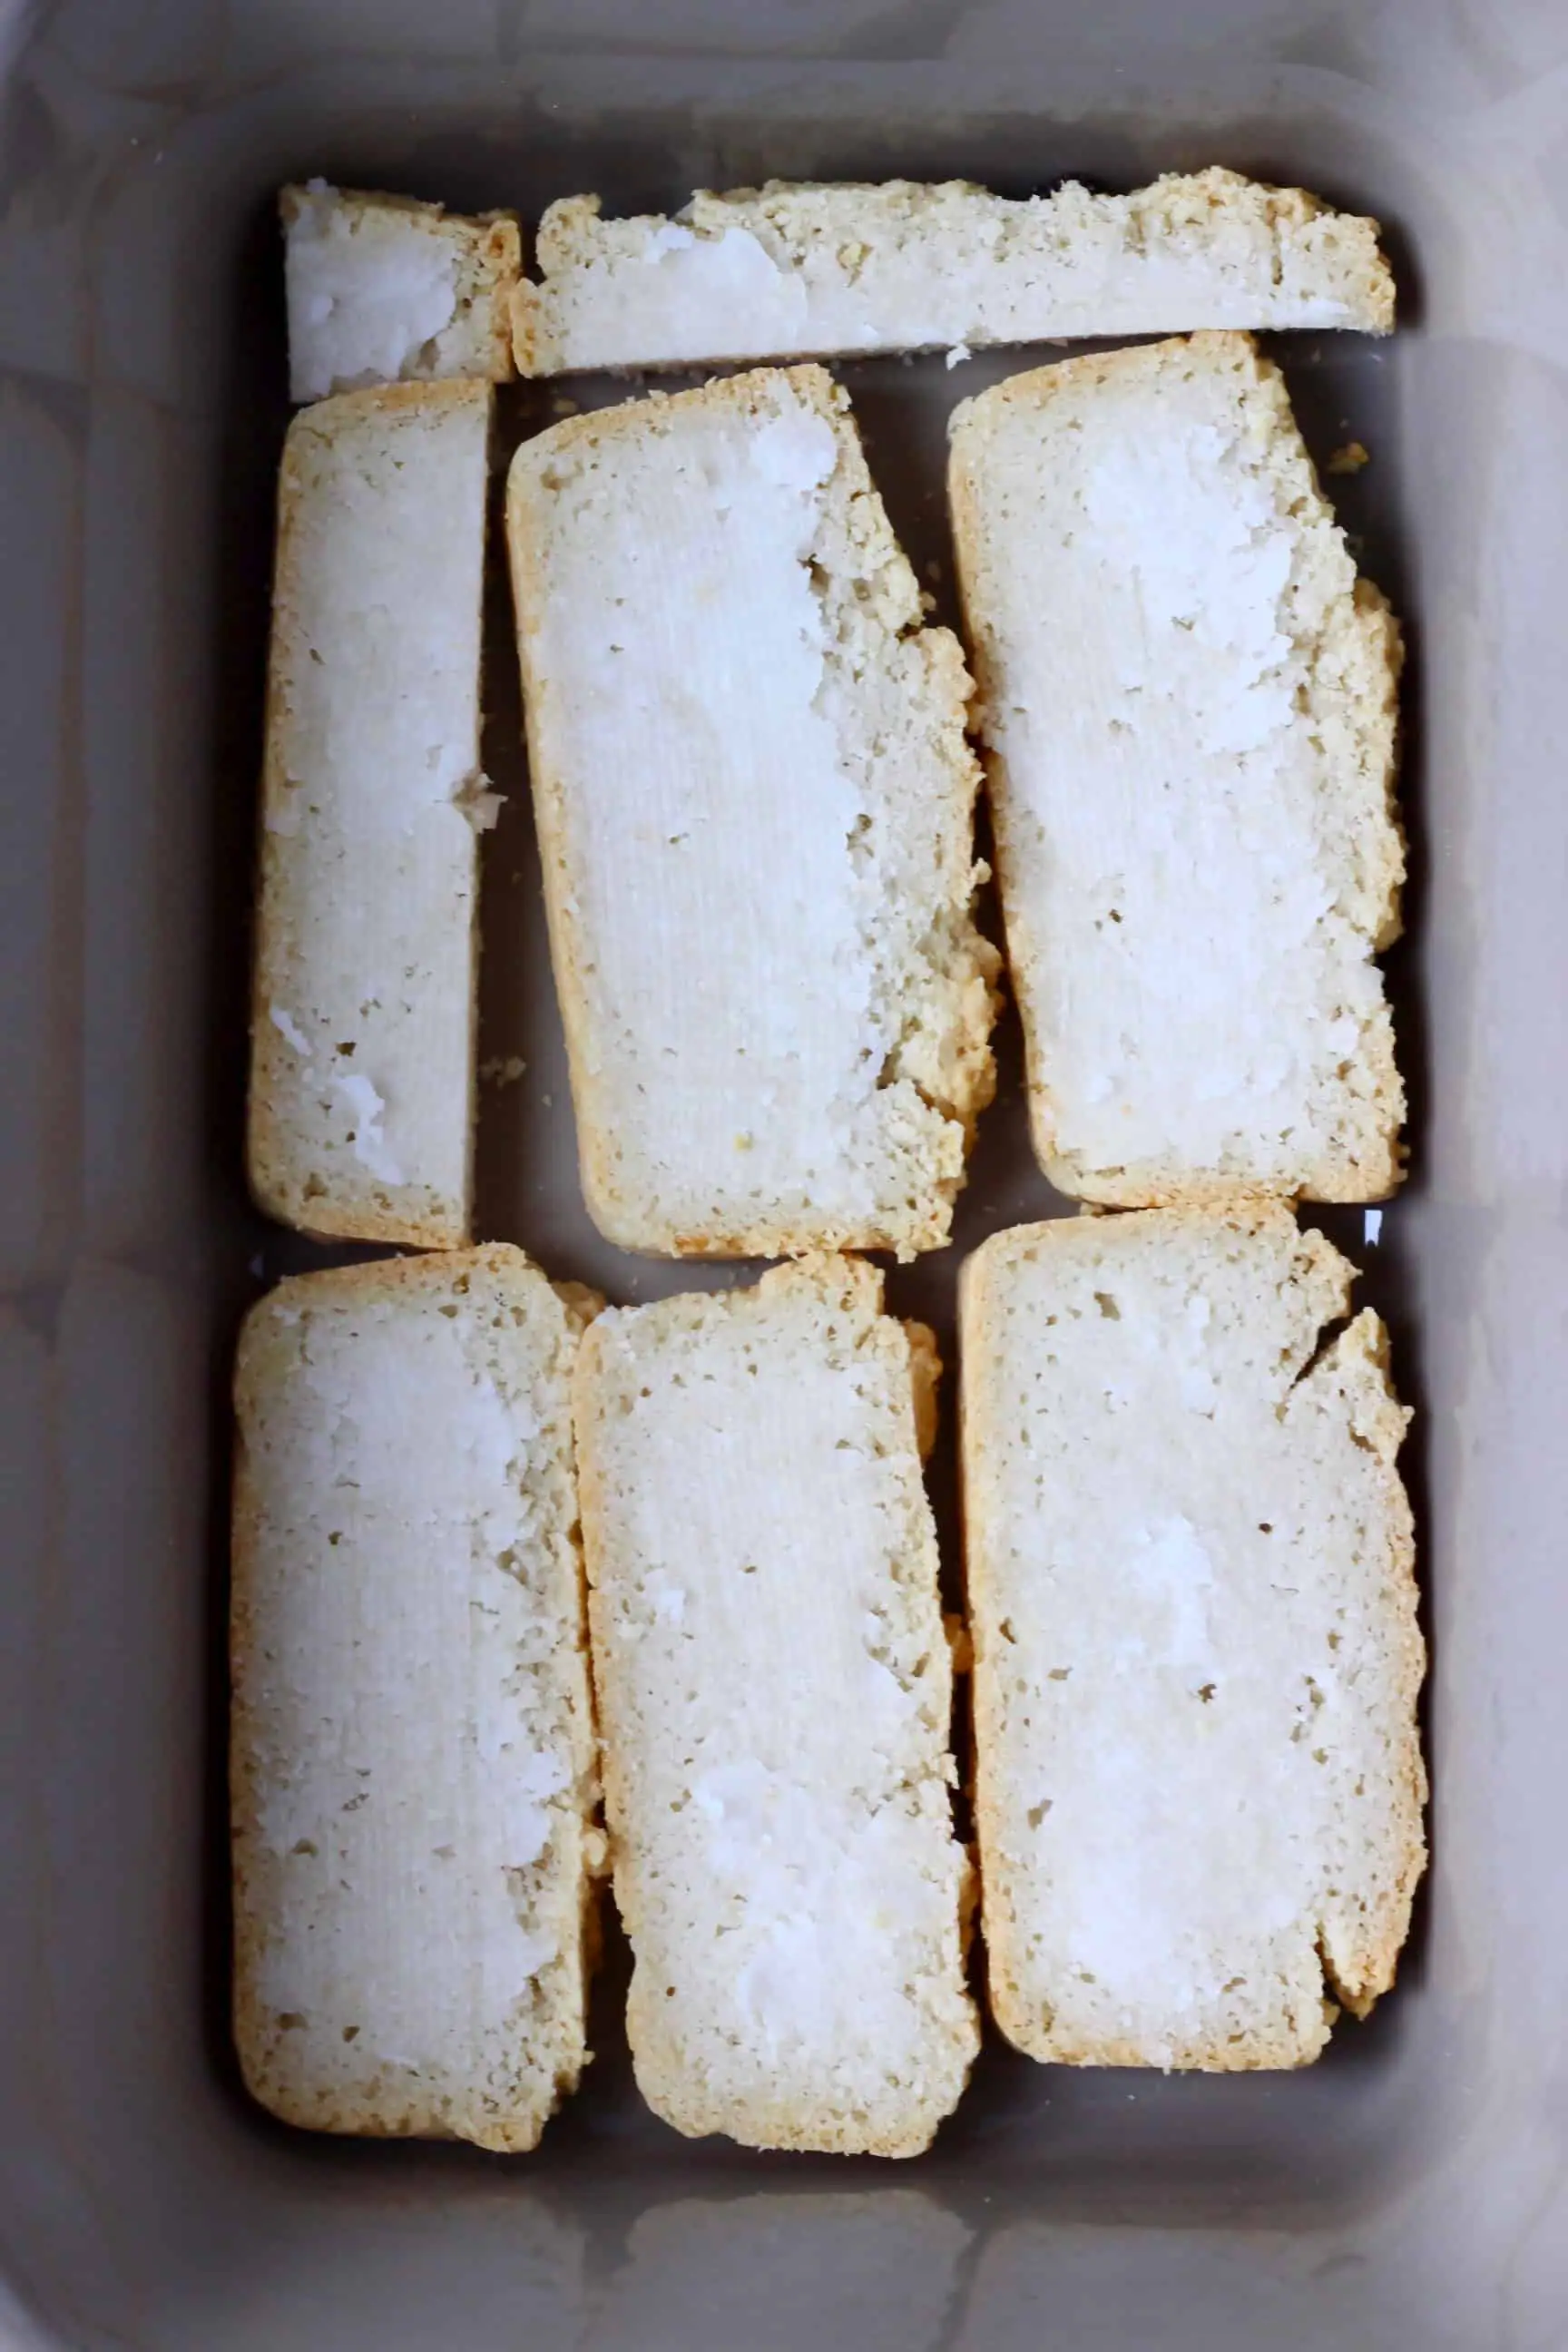 Slices of bread spread with coconut oil in a grey rectangular baking dish